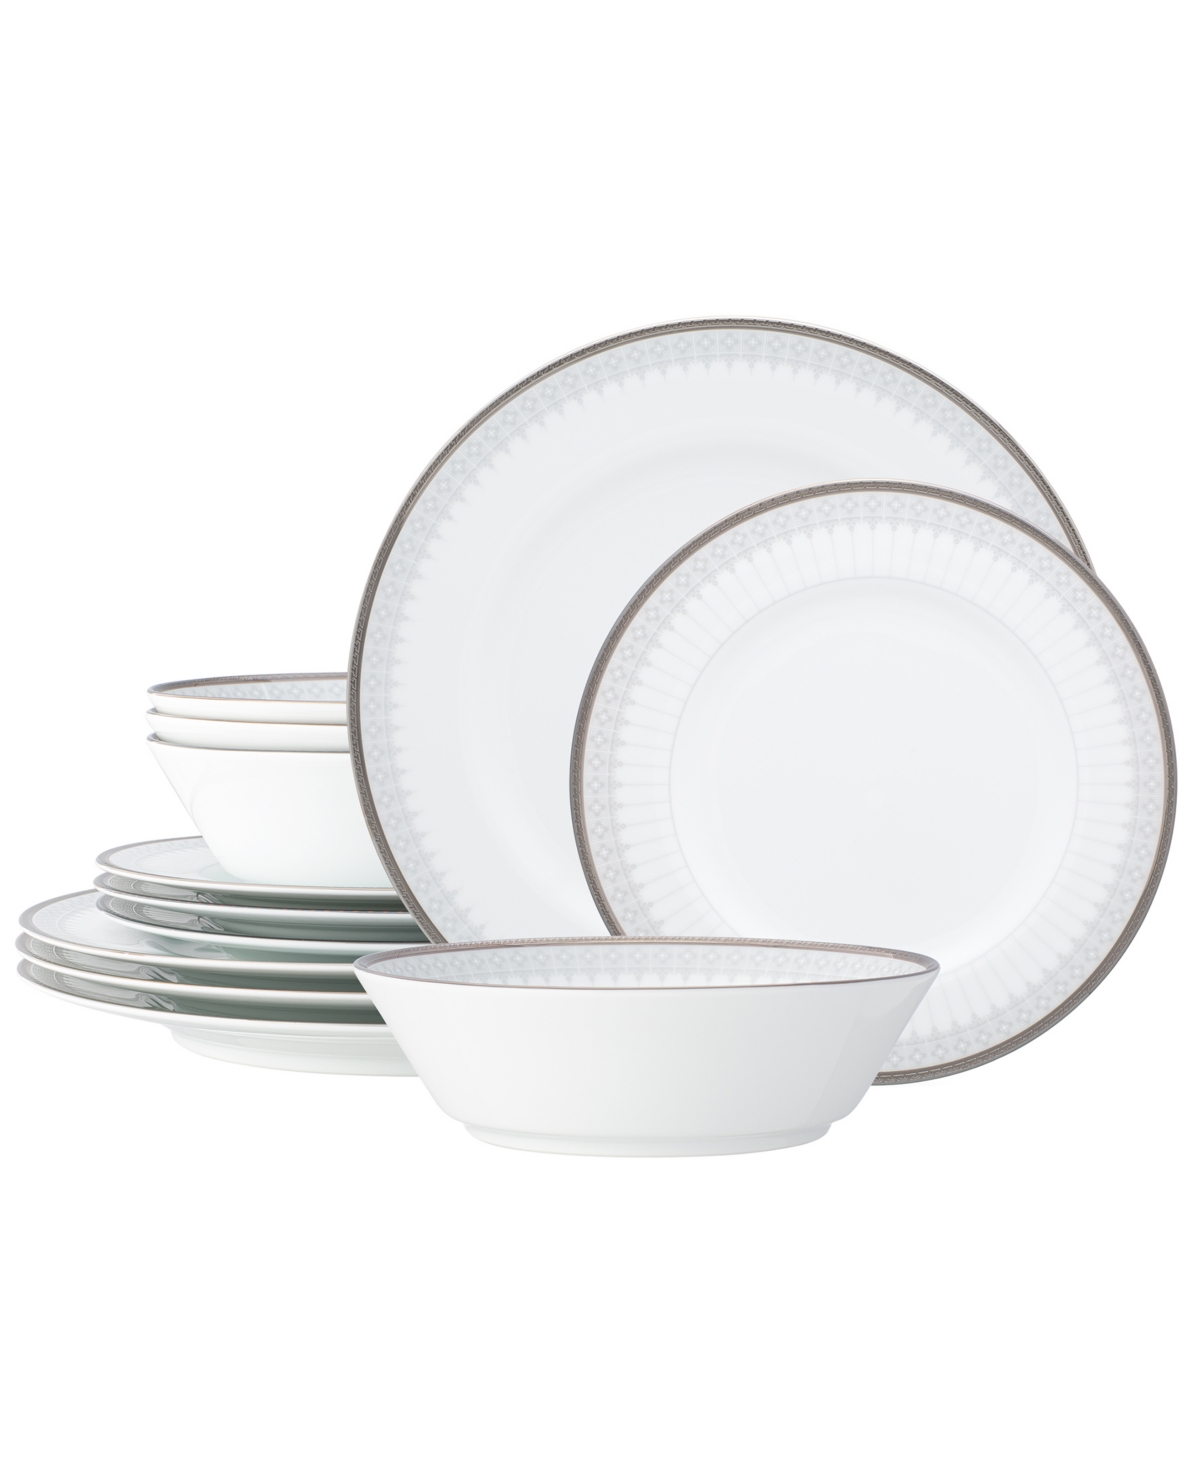 Noritake Silver Colonnade 12 Piece Set, Service For 4 In White